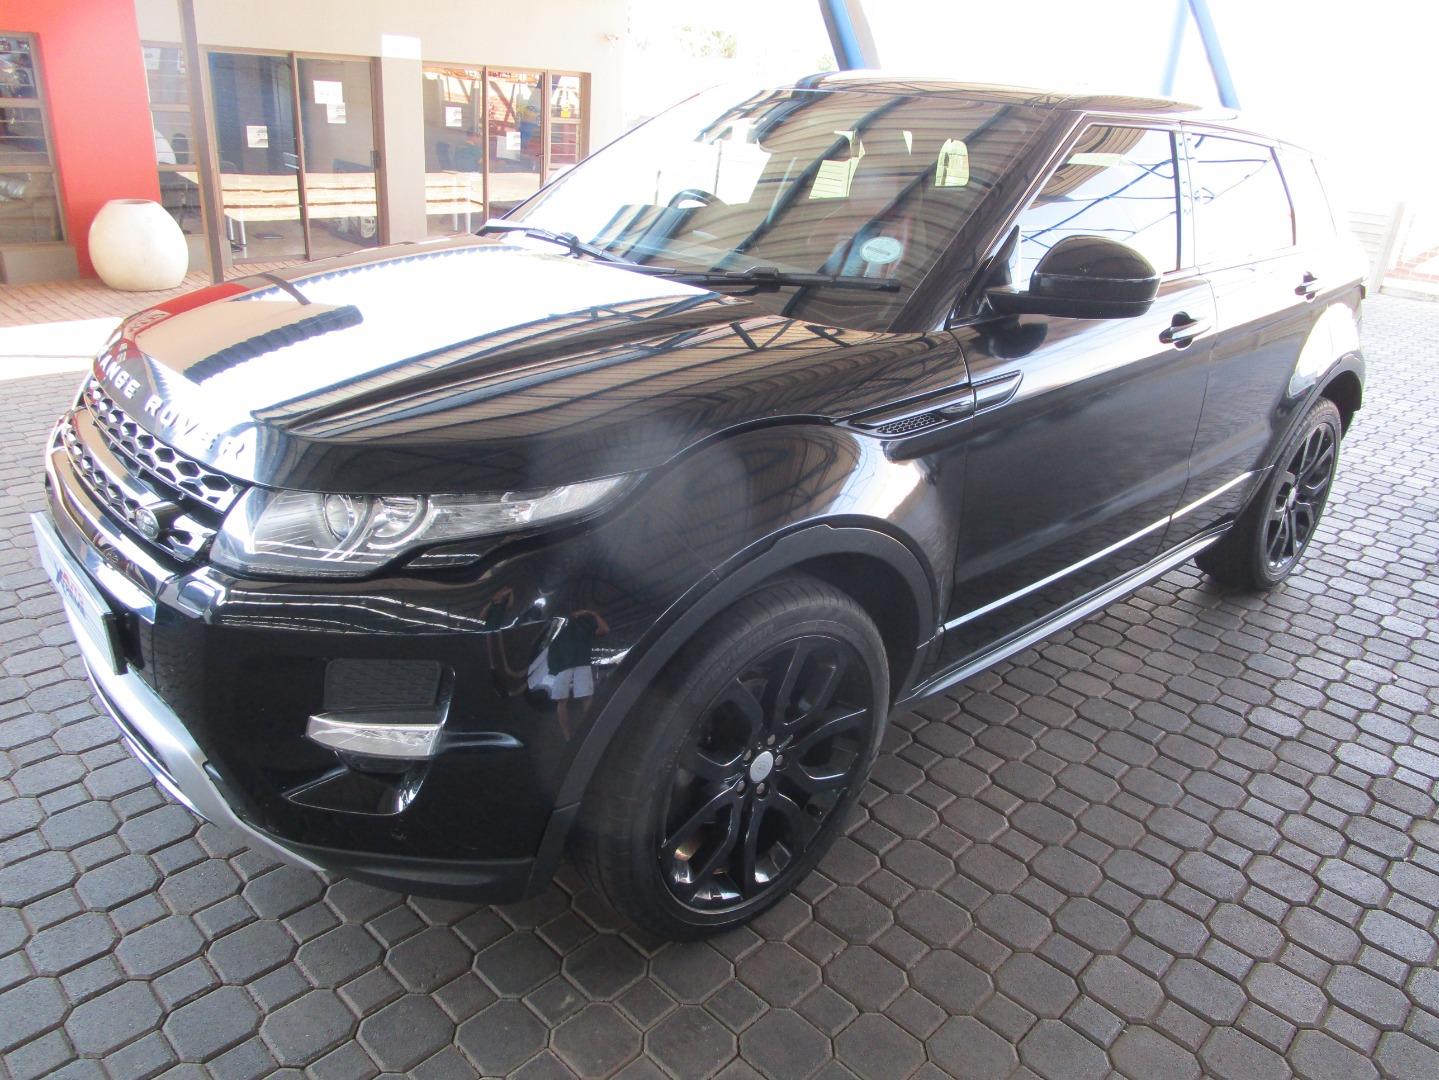 2015 Land Rover Range Rover Evoque Si4 Dynamic For Sale